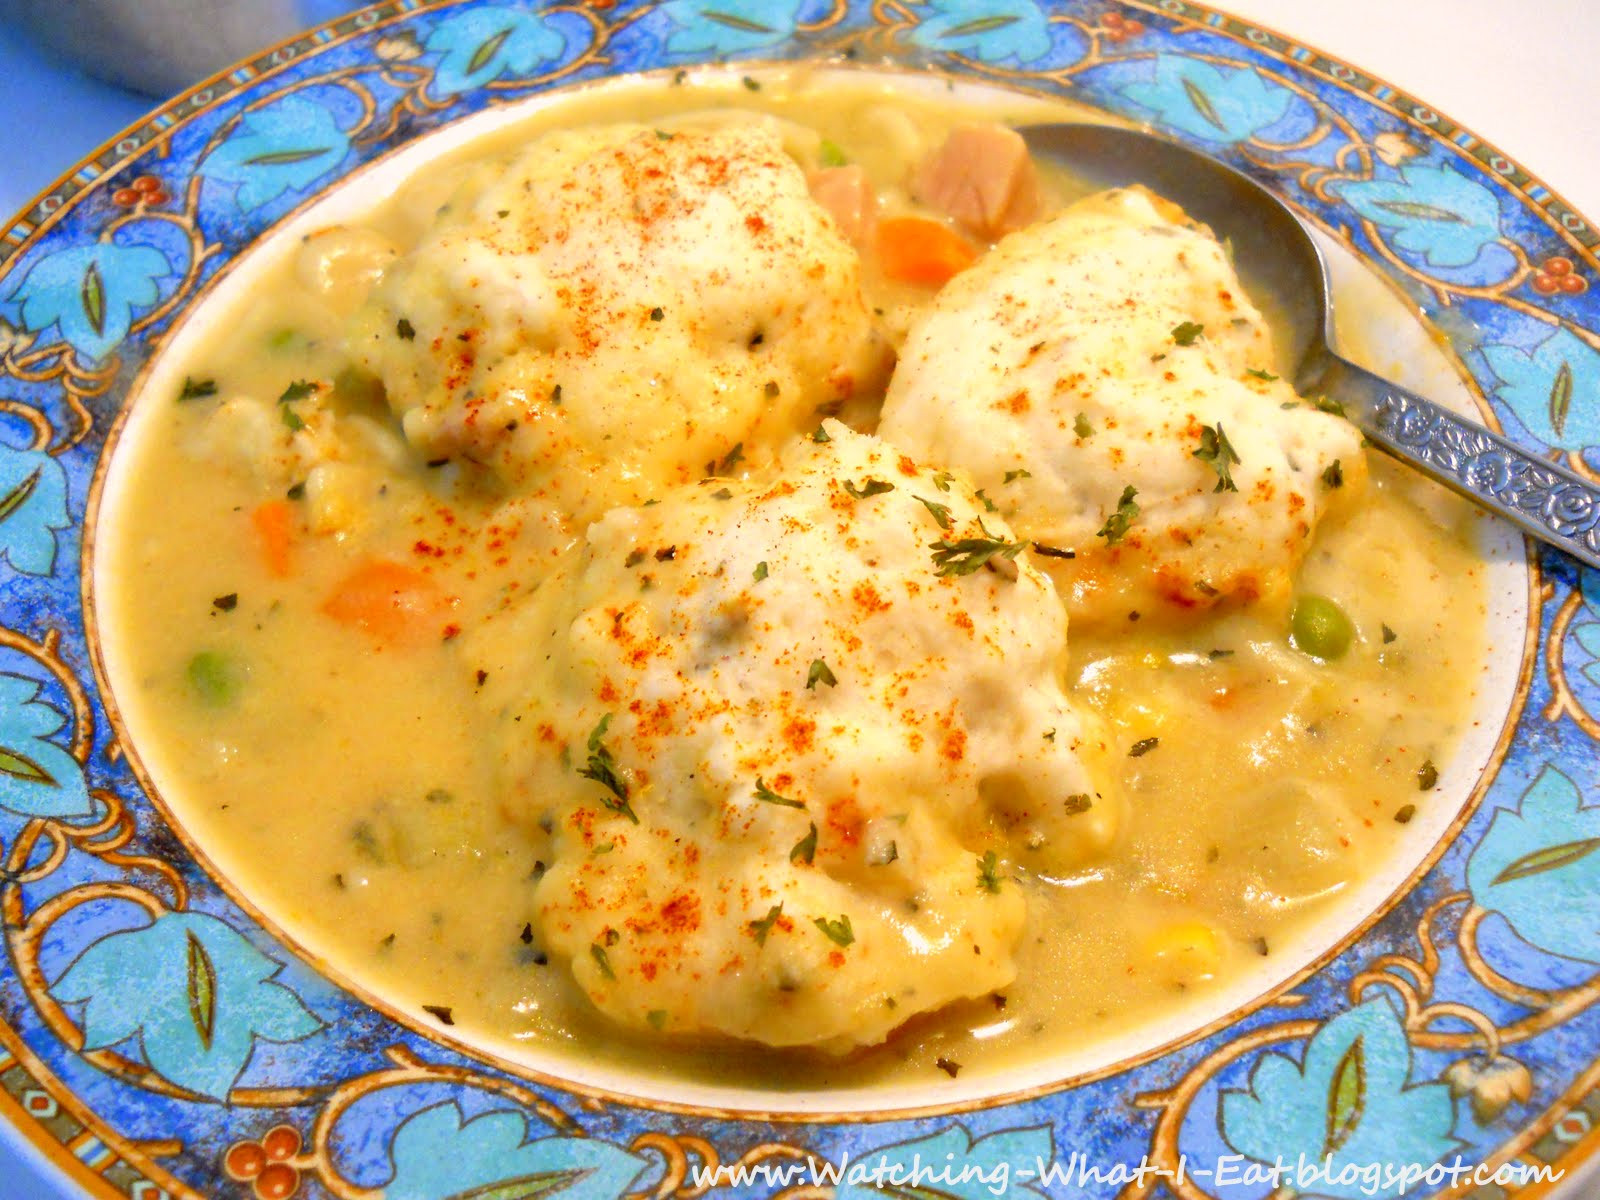 Easy Chicken And Dumplings
 Watching What I Eat Easy Chicken and Dumplings